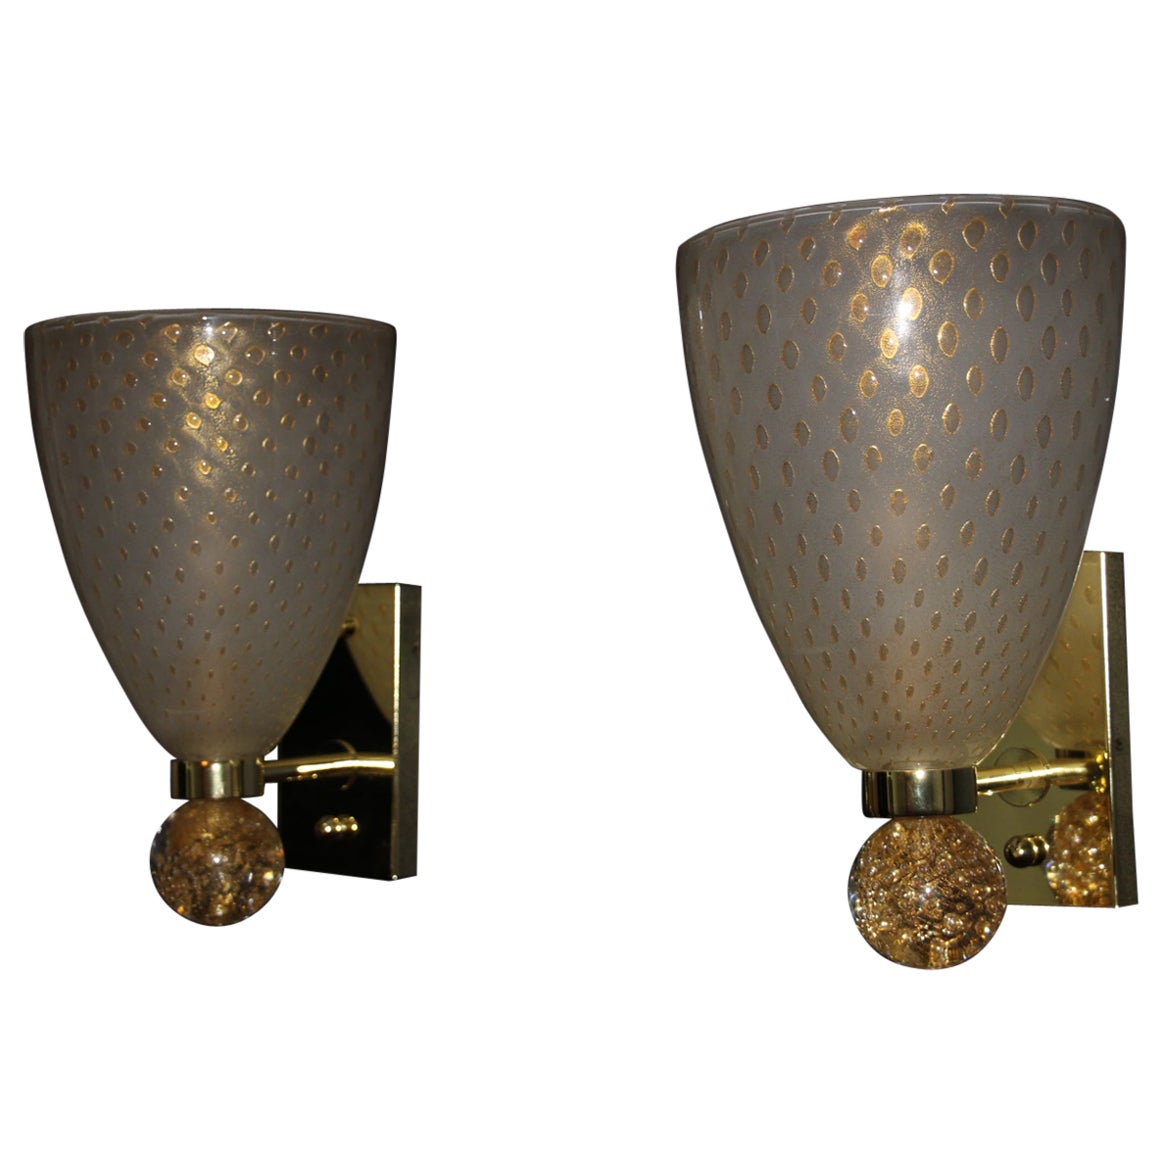 Barovier Style Murano Glass Sconces with Golden Flakes and Bubbles, Wall Lights